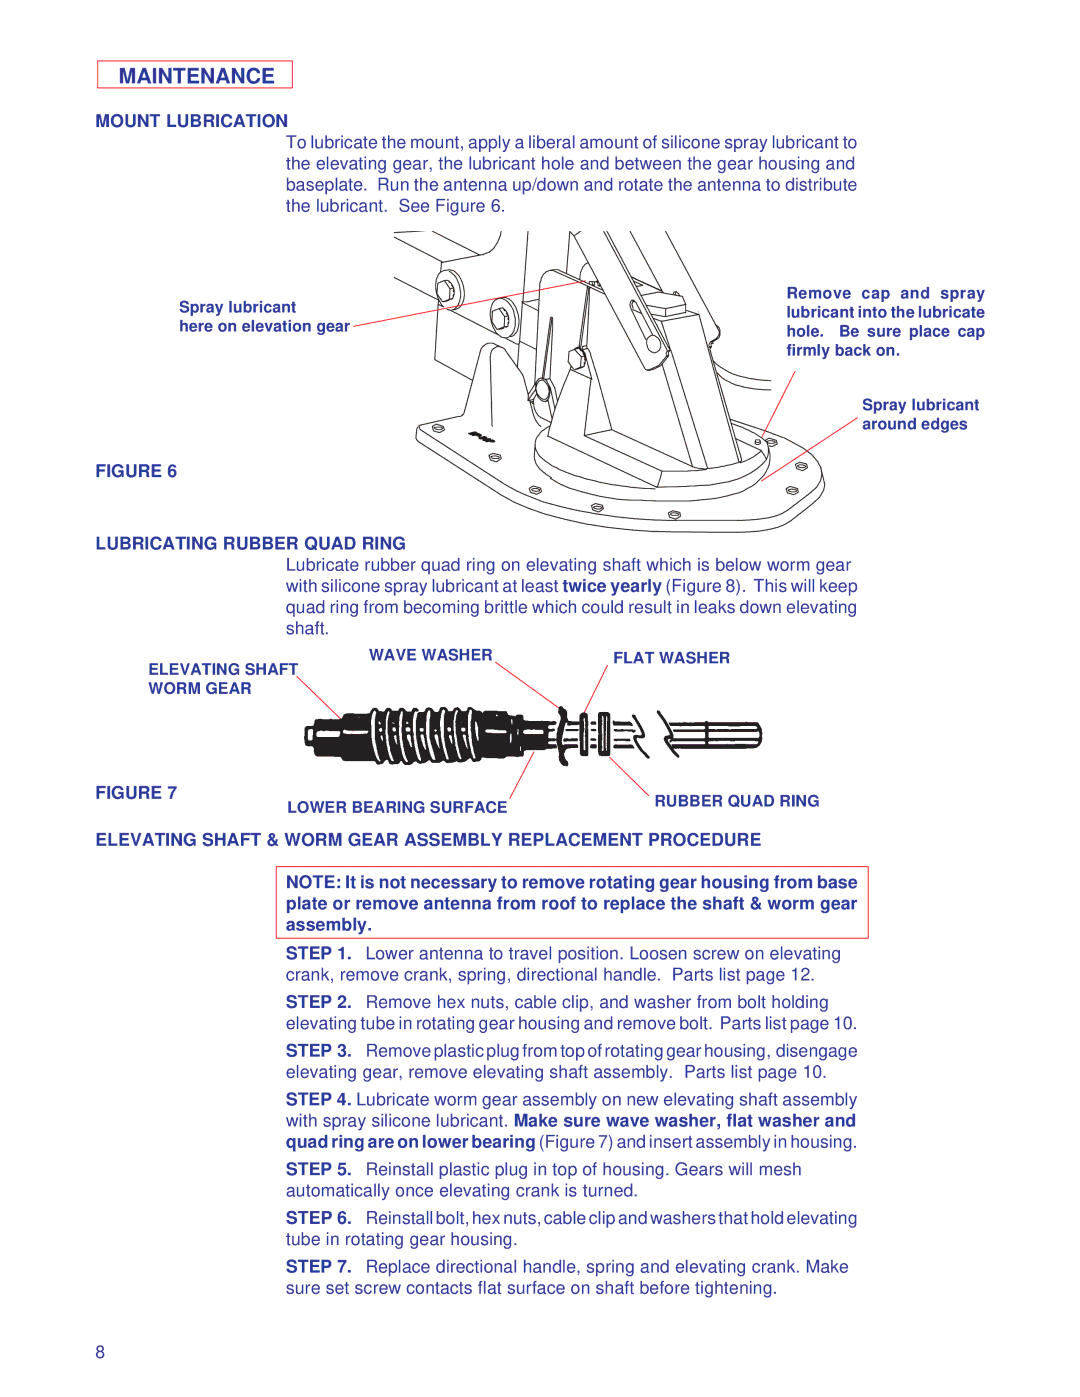 Winegard RD-4600, RD-4646 owner manual Maintenance, Mount Lubrication, Lubricating Rubber Quad Ring 